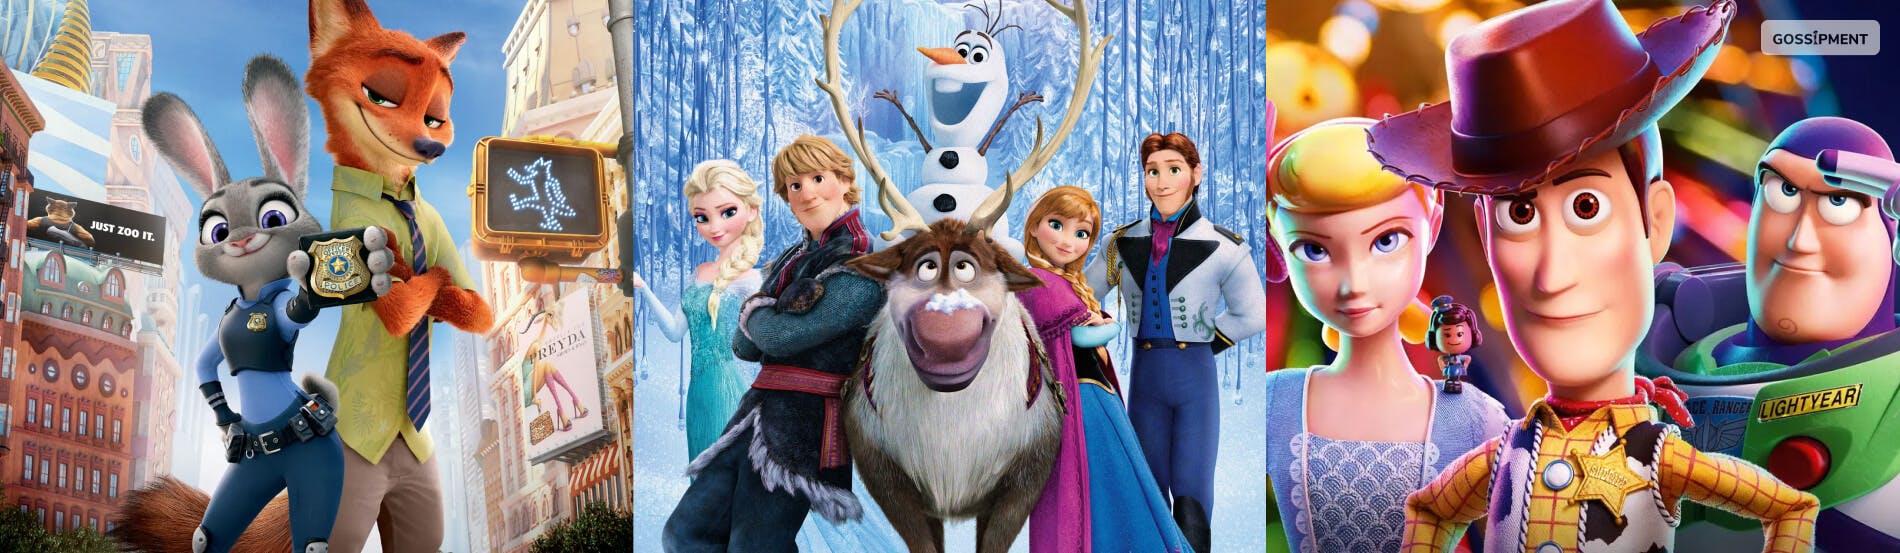 Cover Image for “Toy Story 5” And “Frozen 3”; Disney Announces Sequels To Three Mega Movies!